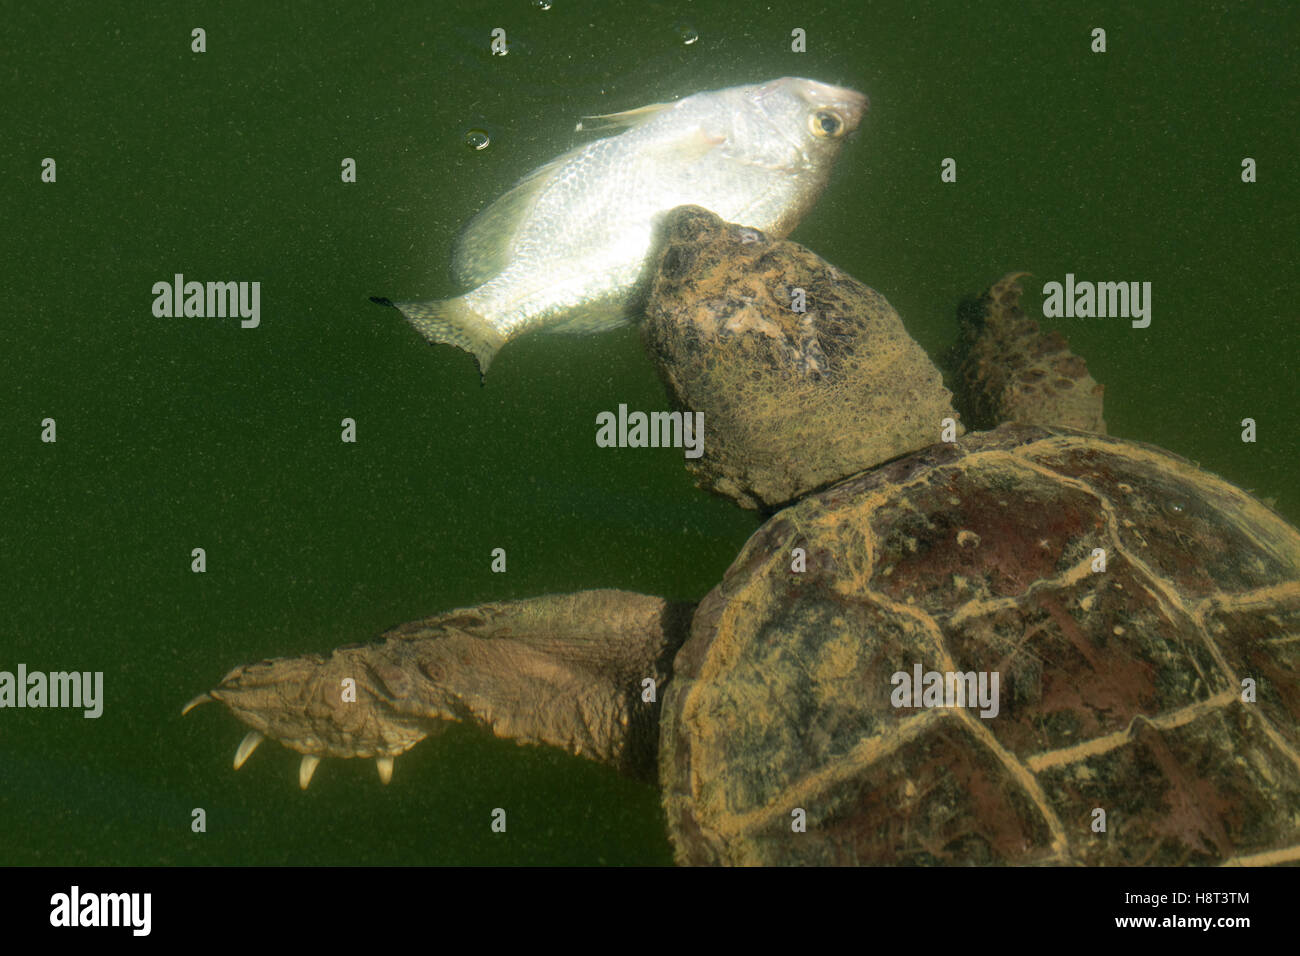 Snapping turtle, Chelydra serpentina, eating white crappie Stock Photo